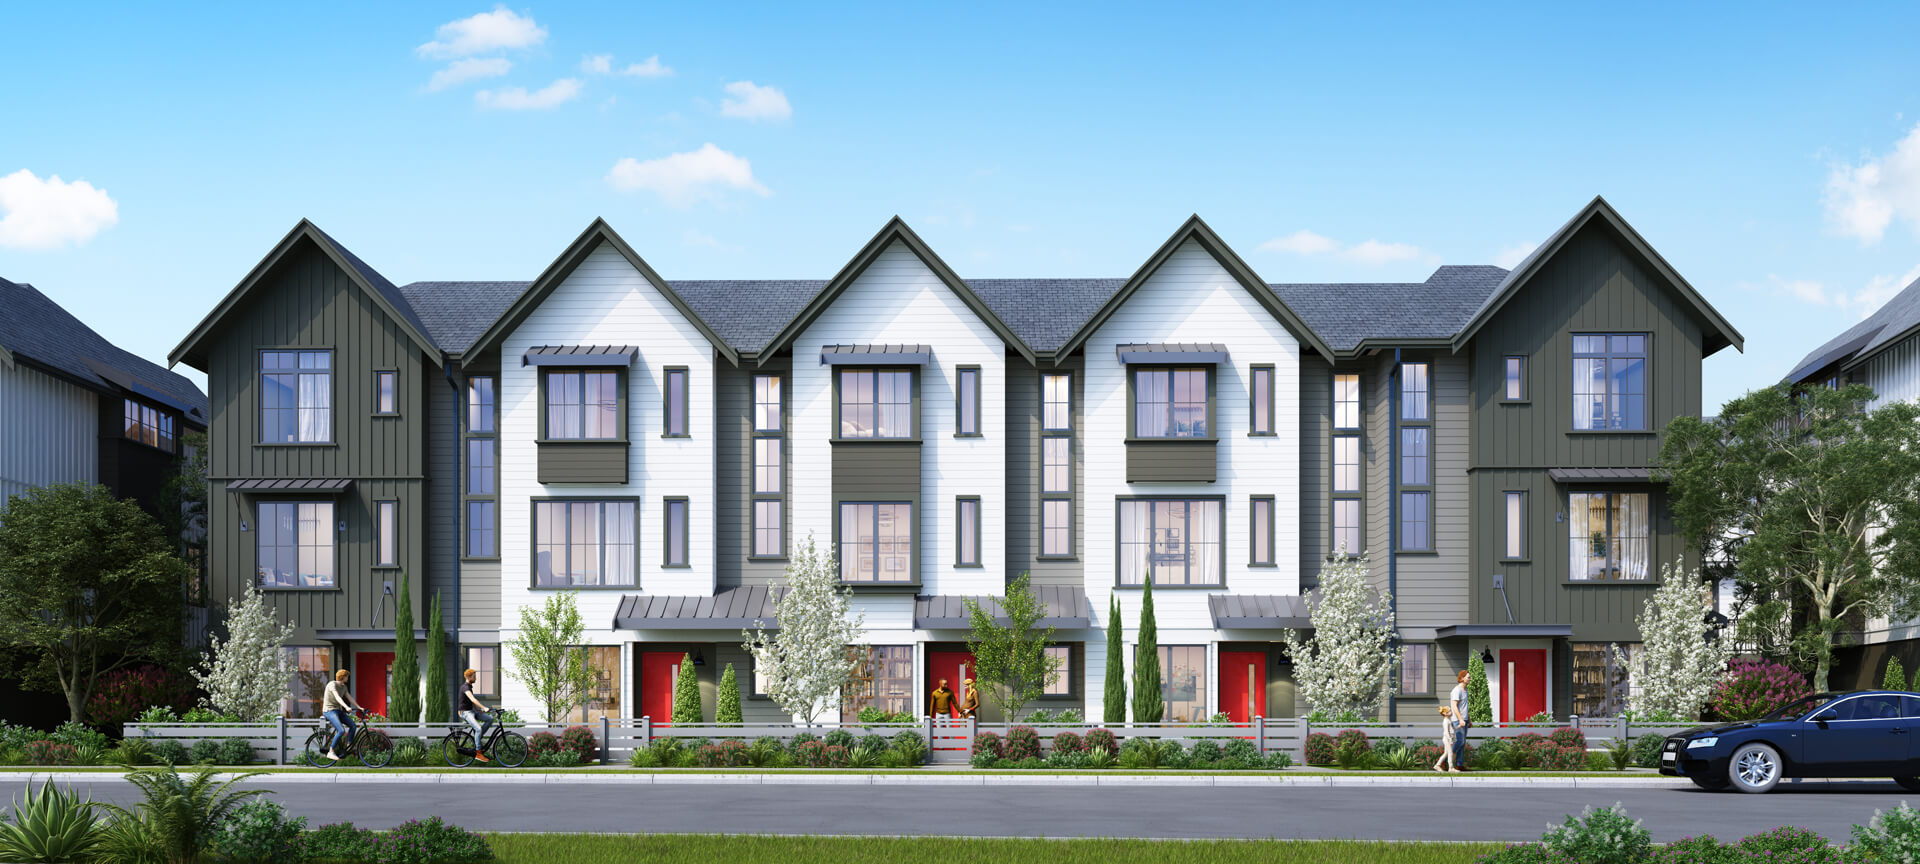 Glenpark Row II Townhomes in Kelowna by VanMar – Prices, Plans, Availability